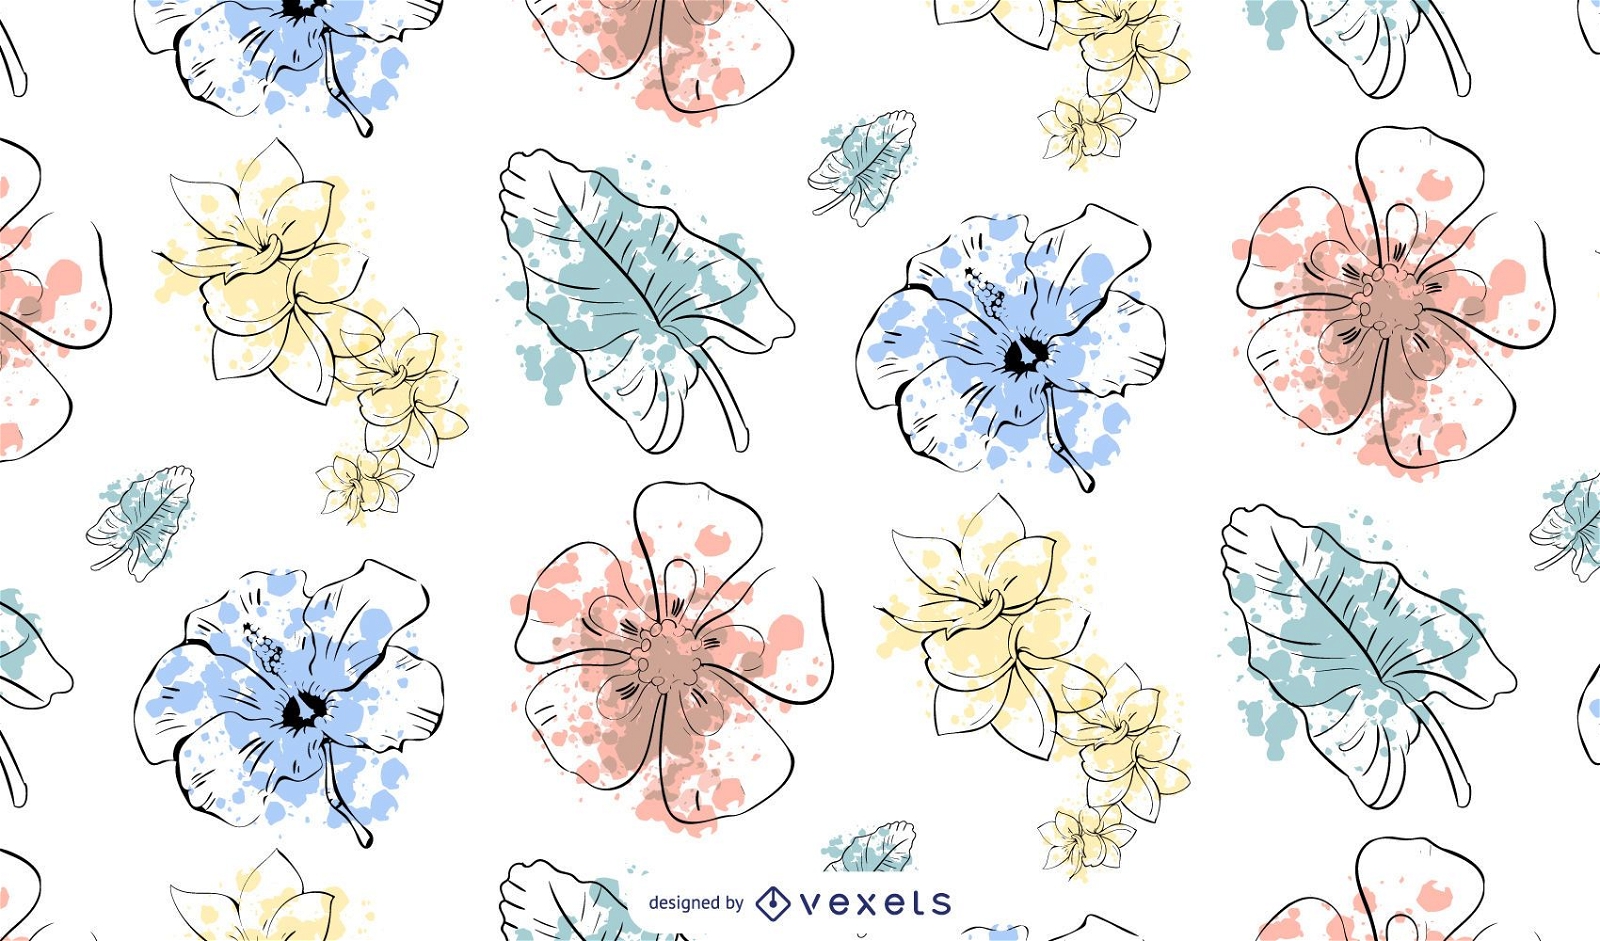 Watercolor splash and tropical flowers pattern design